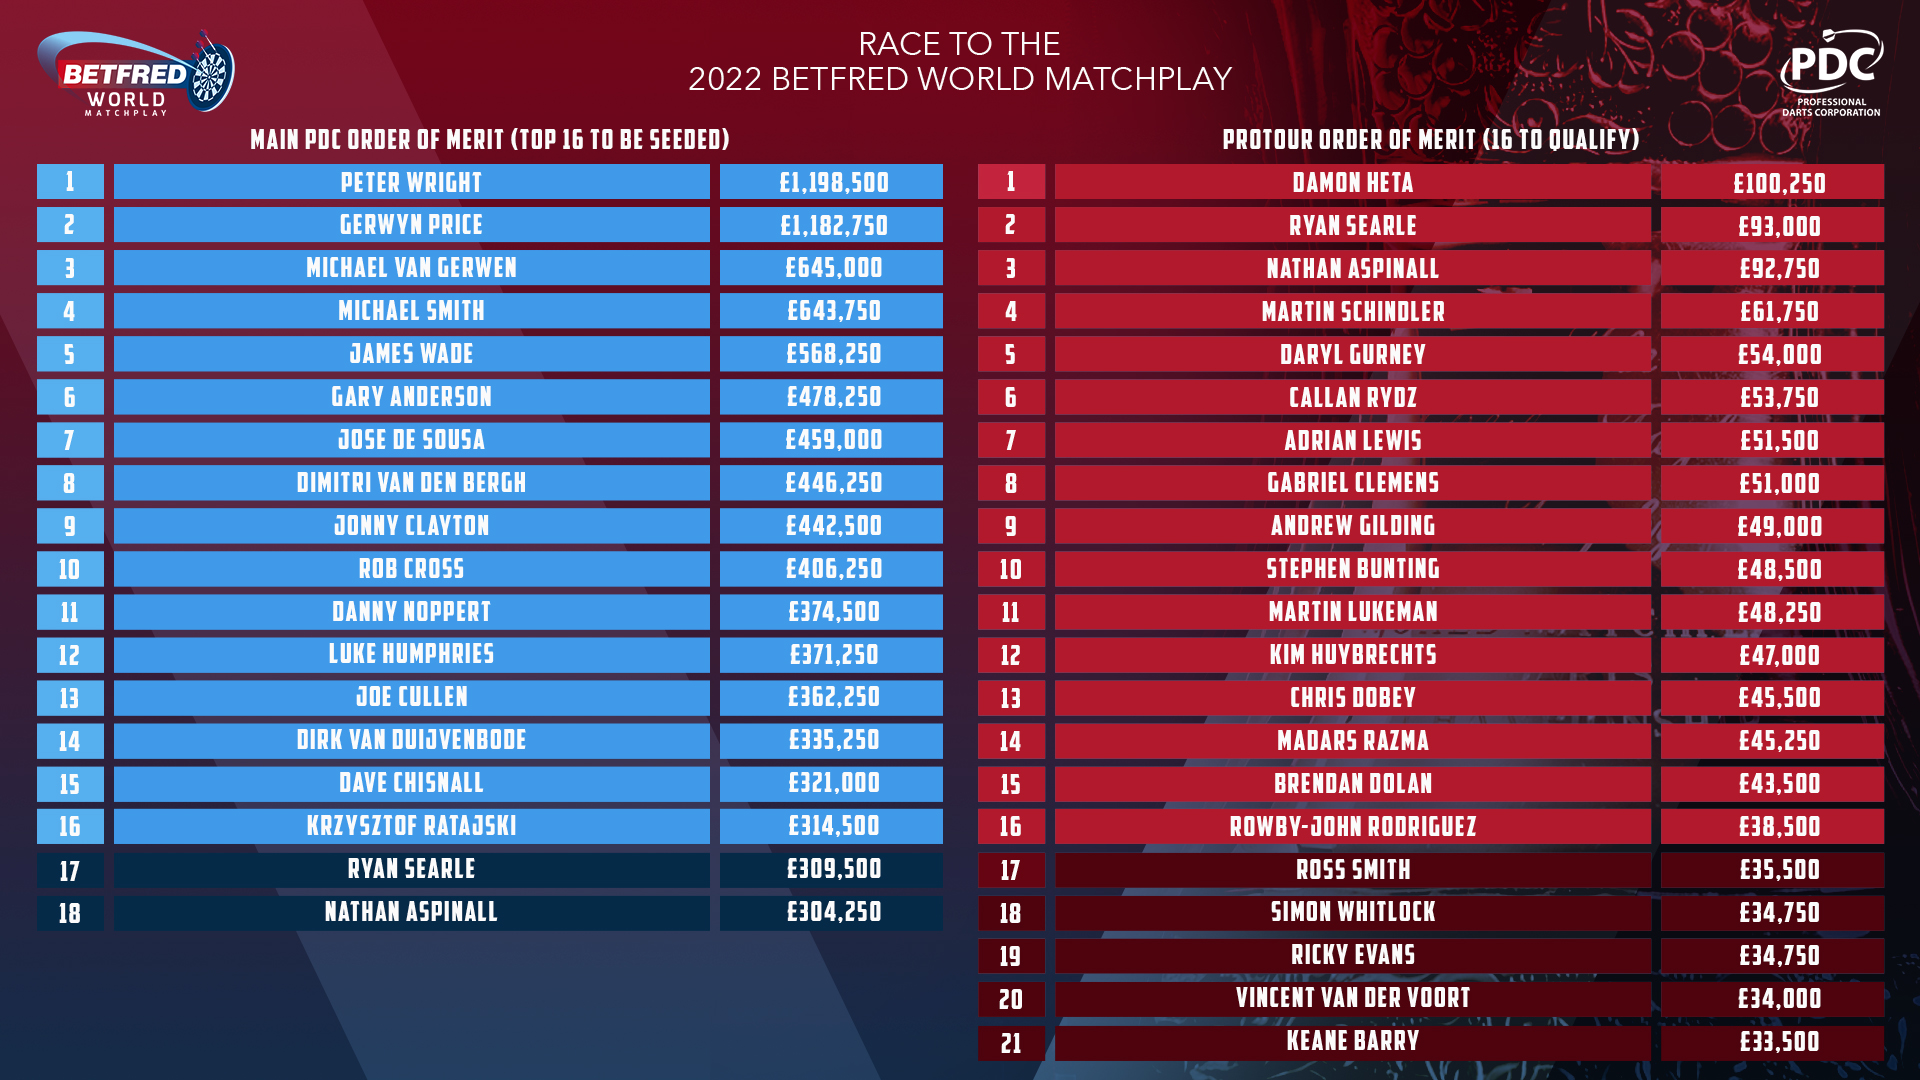 Betfred World Matchplay qualification race